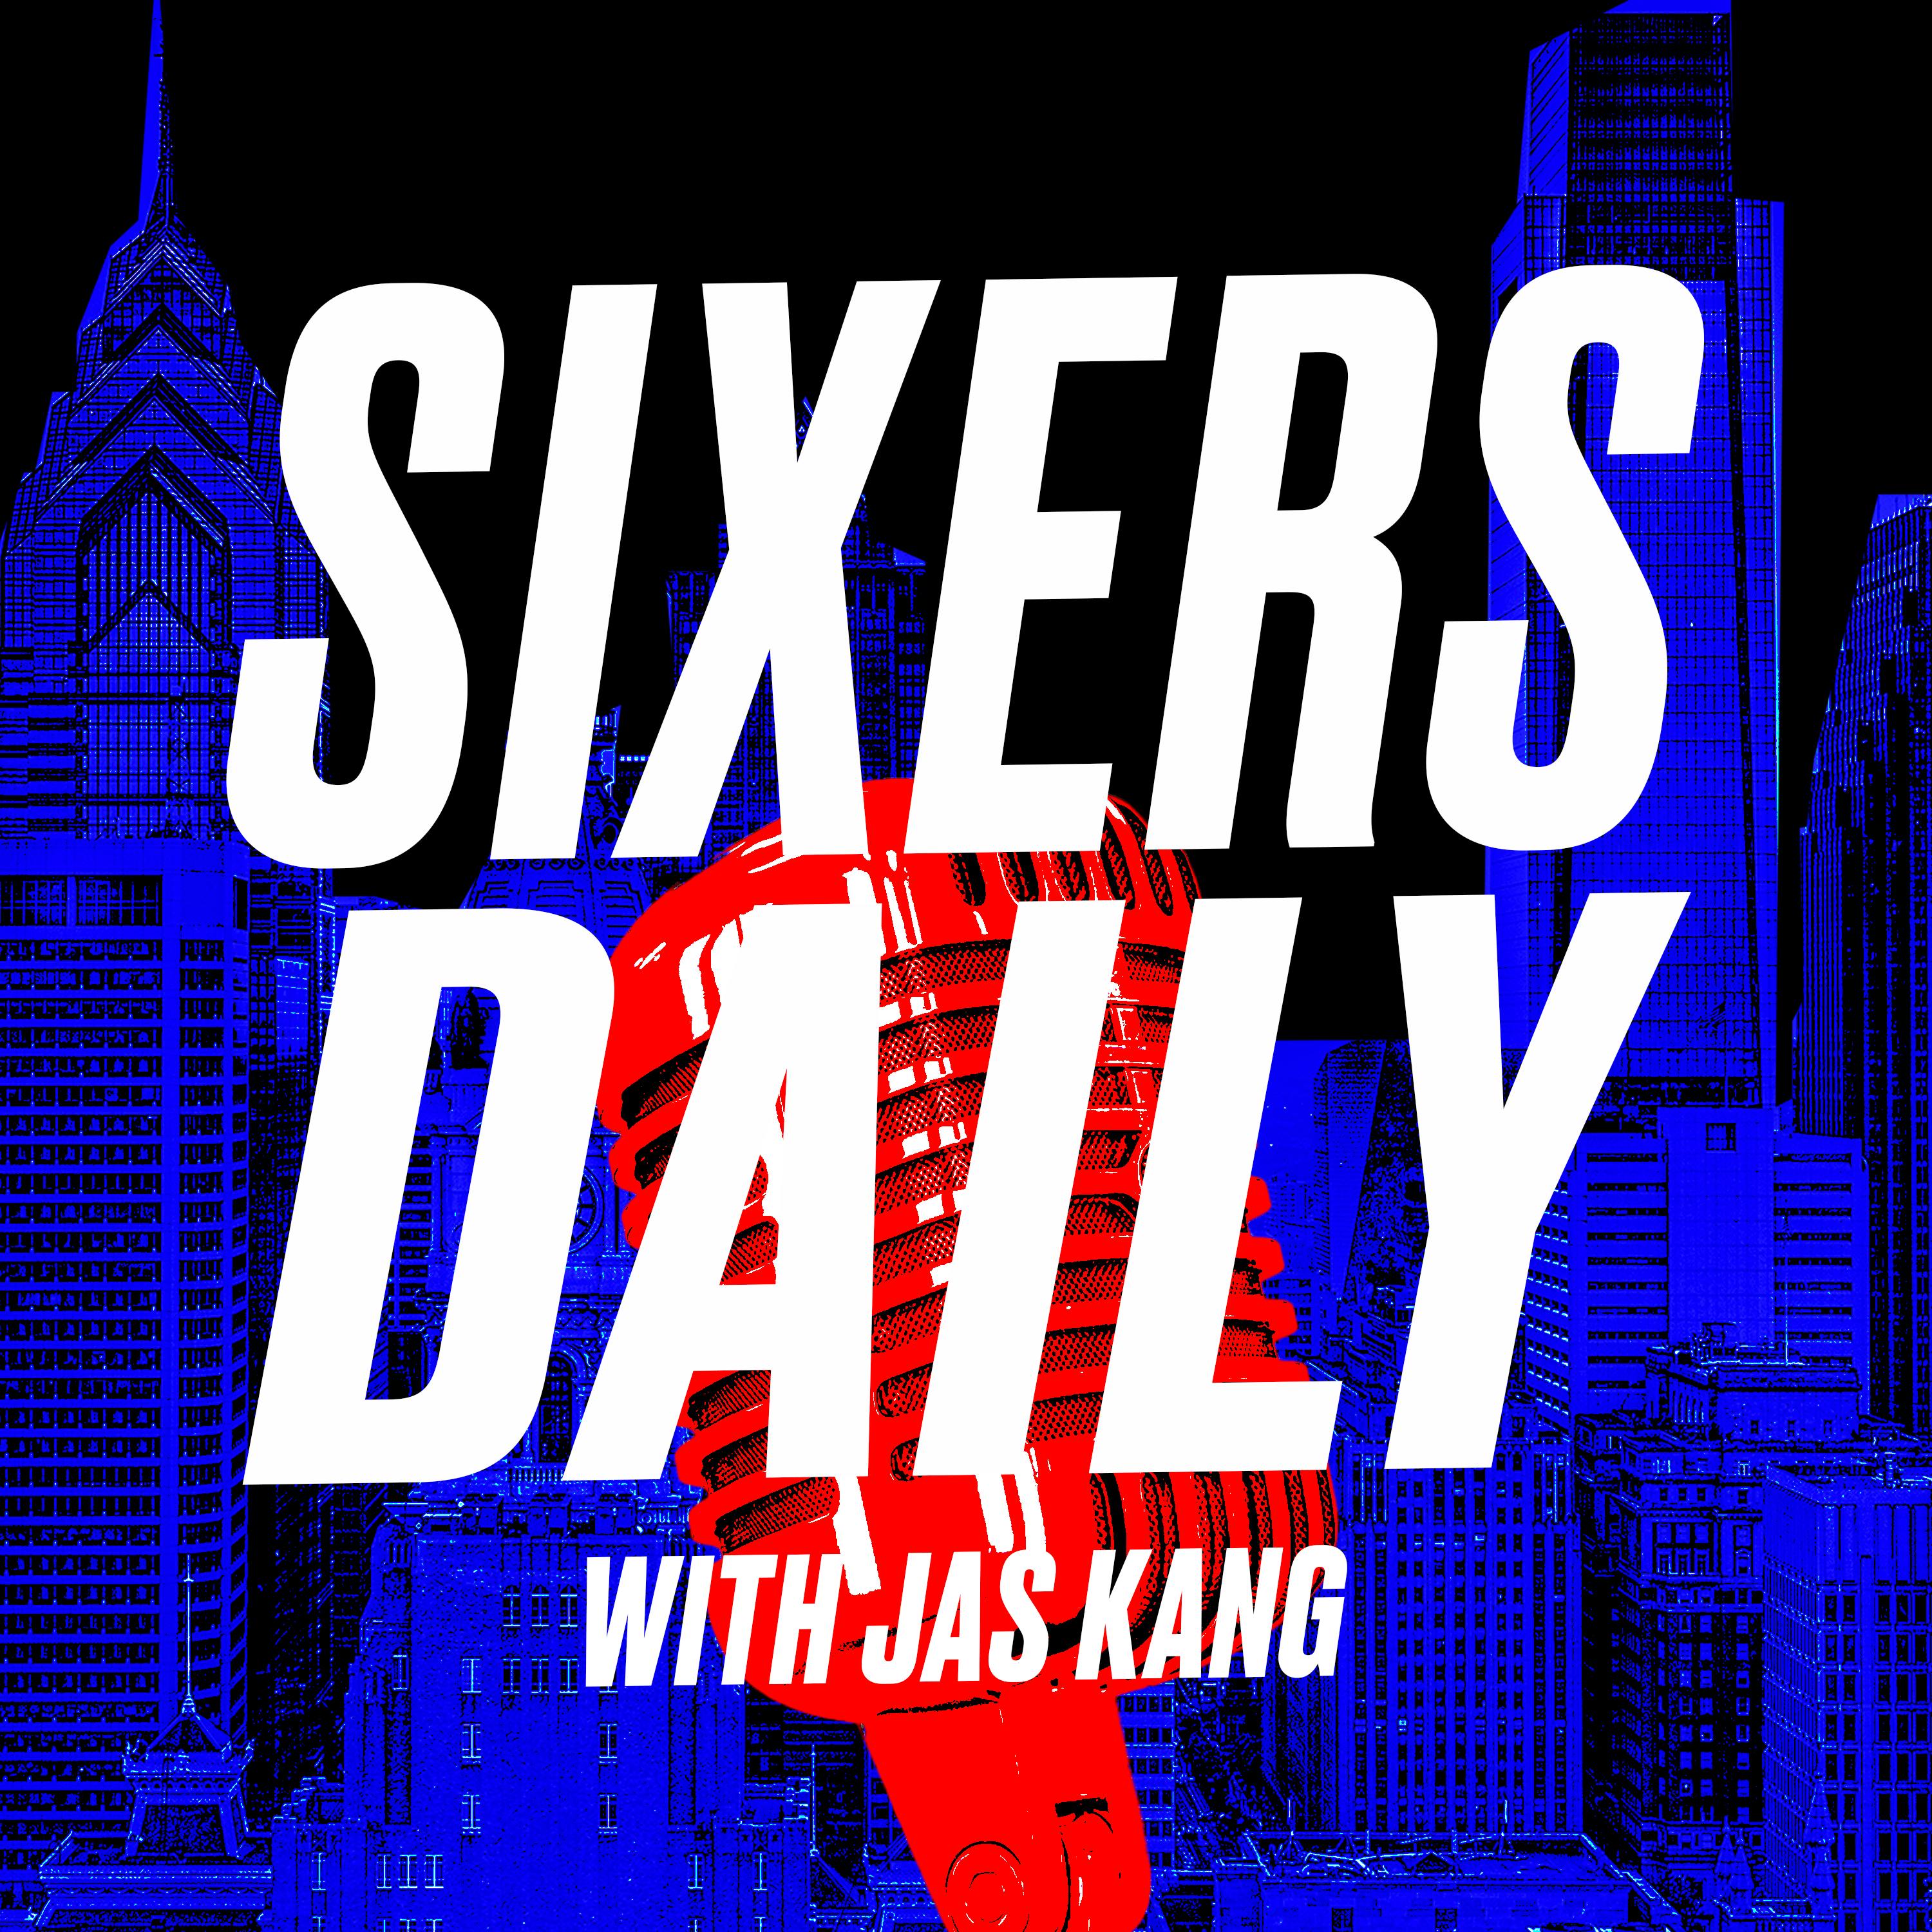 Sixers Daily with Jas Kang - James Harden ranks No. 11 in ESPN's Top 100 NBA players, which teams had the best NBA offseason, plus reactions to the latest Robert Sarver news. With Jackson Frank.